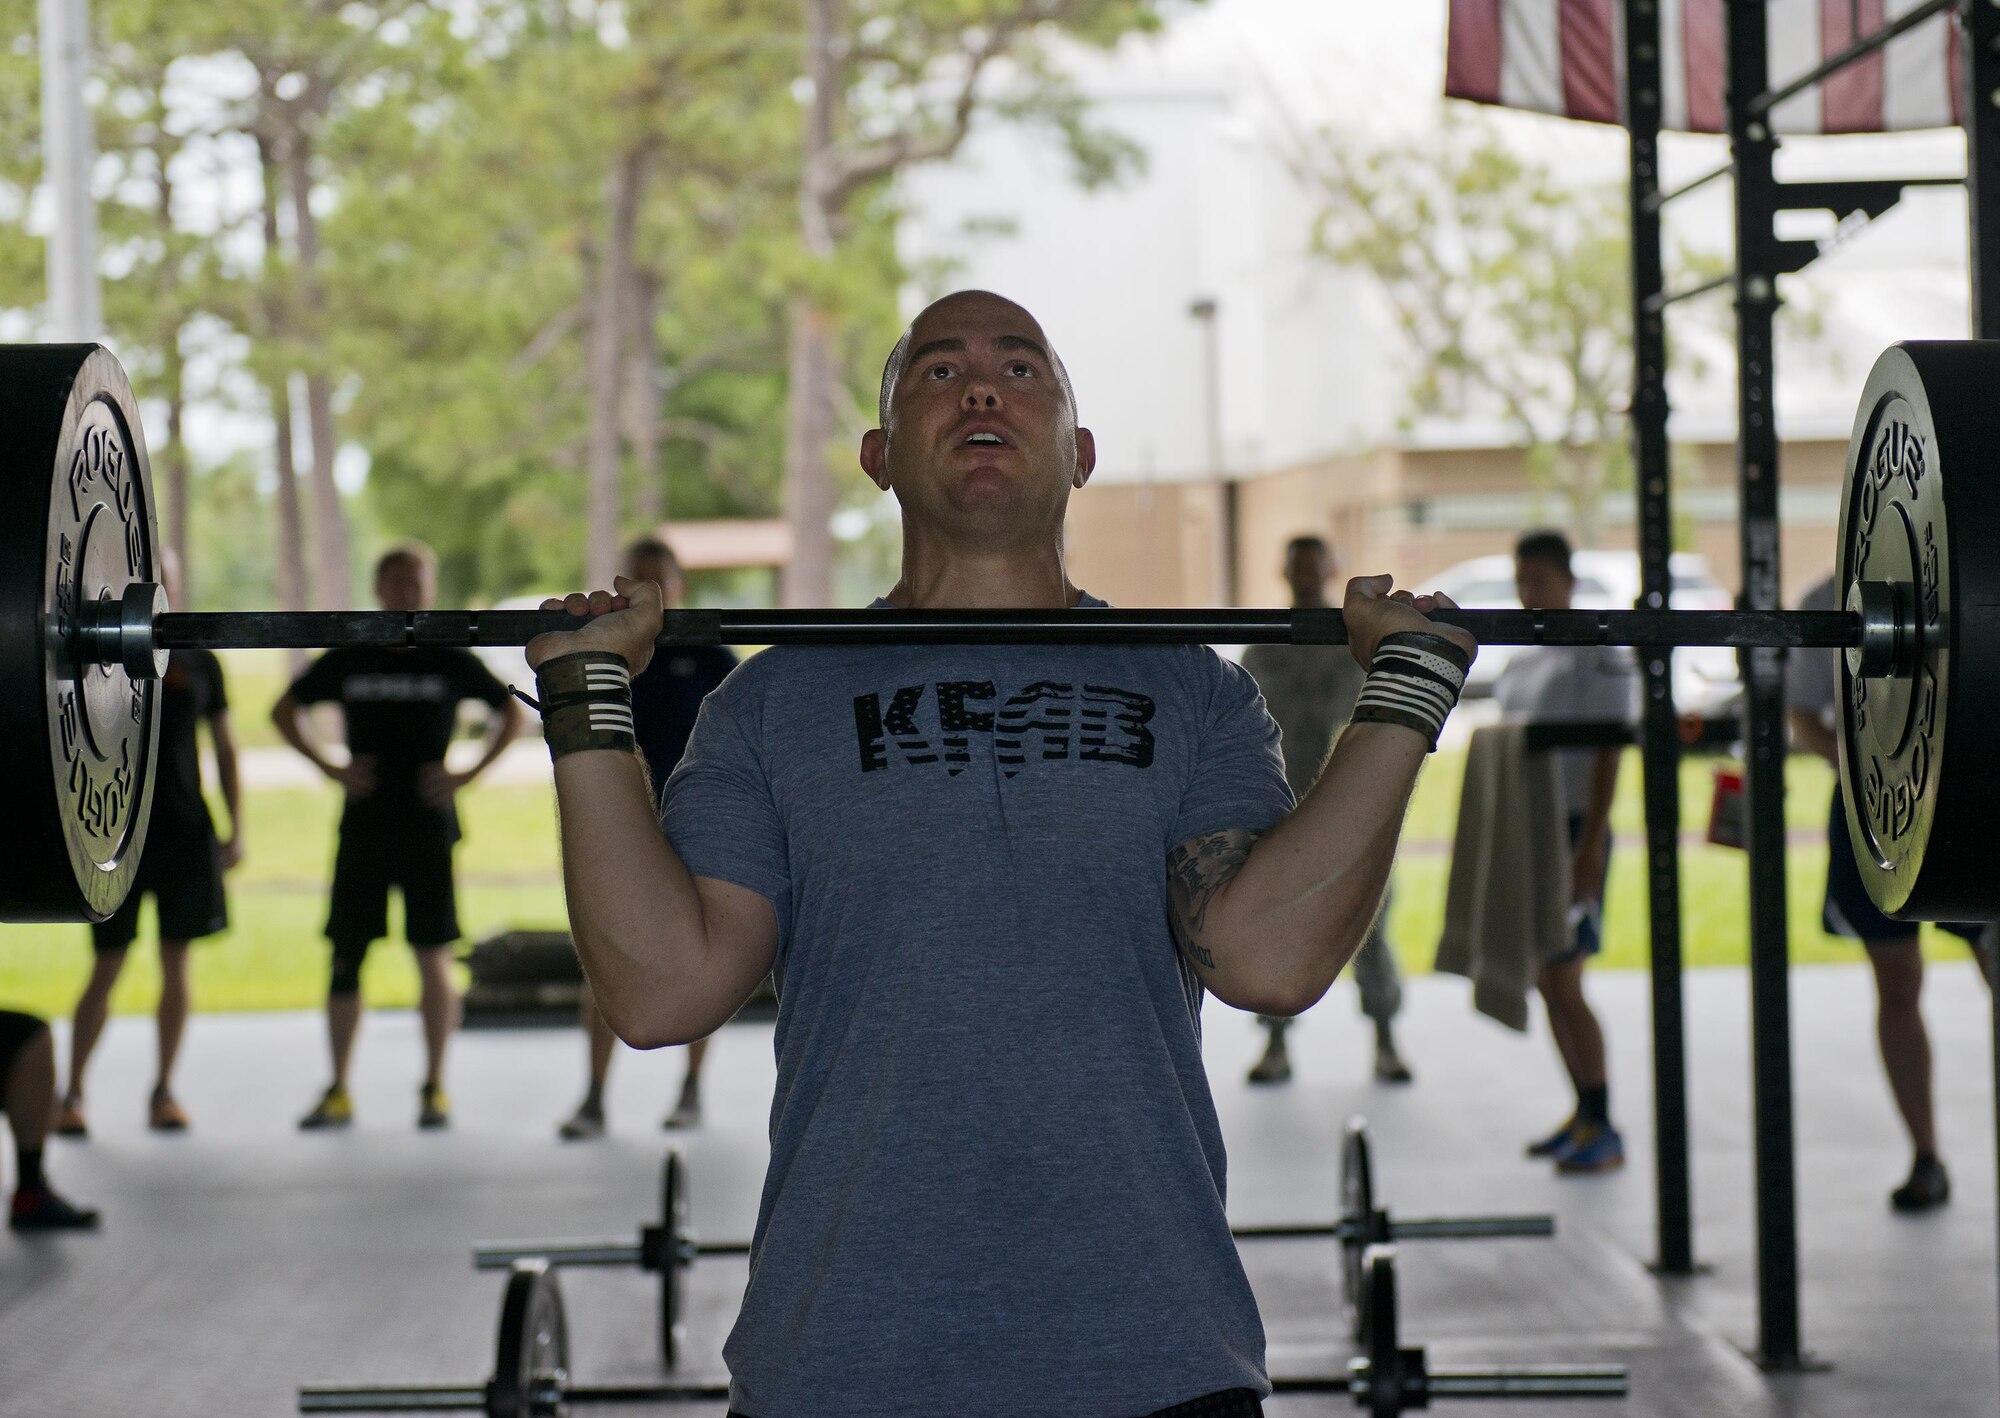 Tech. Sgt. Andrew Knudsen, 919th Special Operations Maintenance Group, prepares to lift weights over his head during a team combat fit competition June 11 at Duke Field, Fla.  The three-round competition pushed the teams to their limits with repetitive weight lifting, rowing, sled-pulling and other kinetic activities.  (U.S. Air Force photo/Tech. Sgt. Sam King)